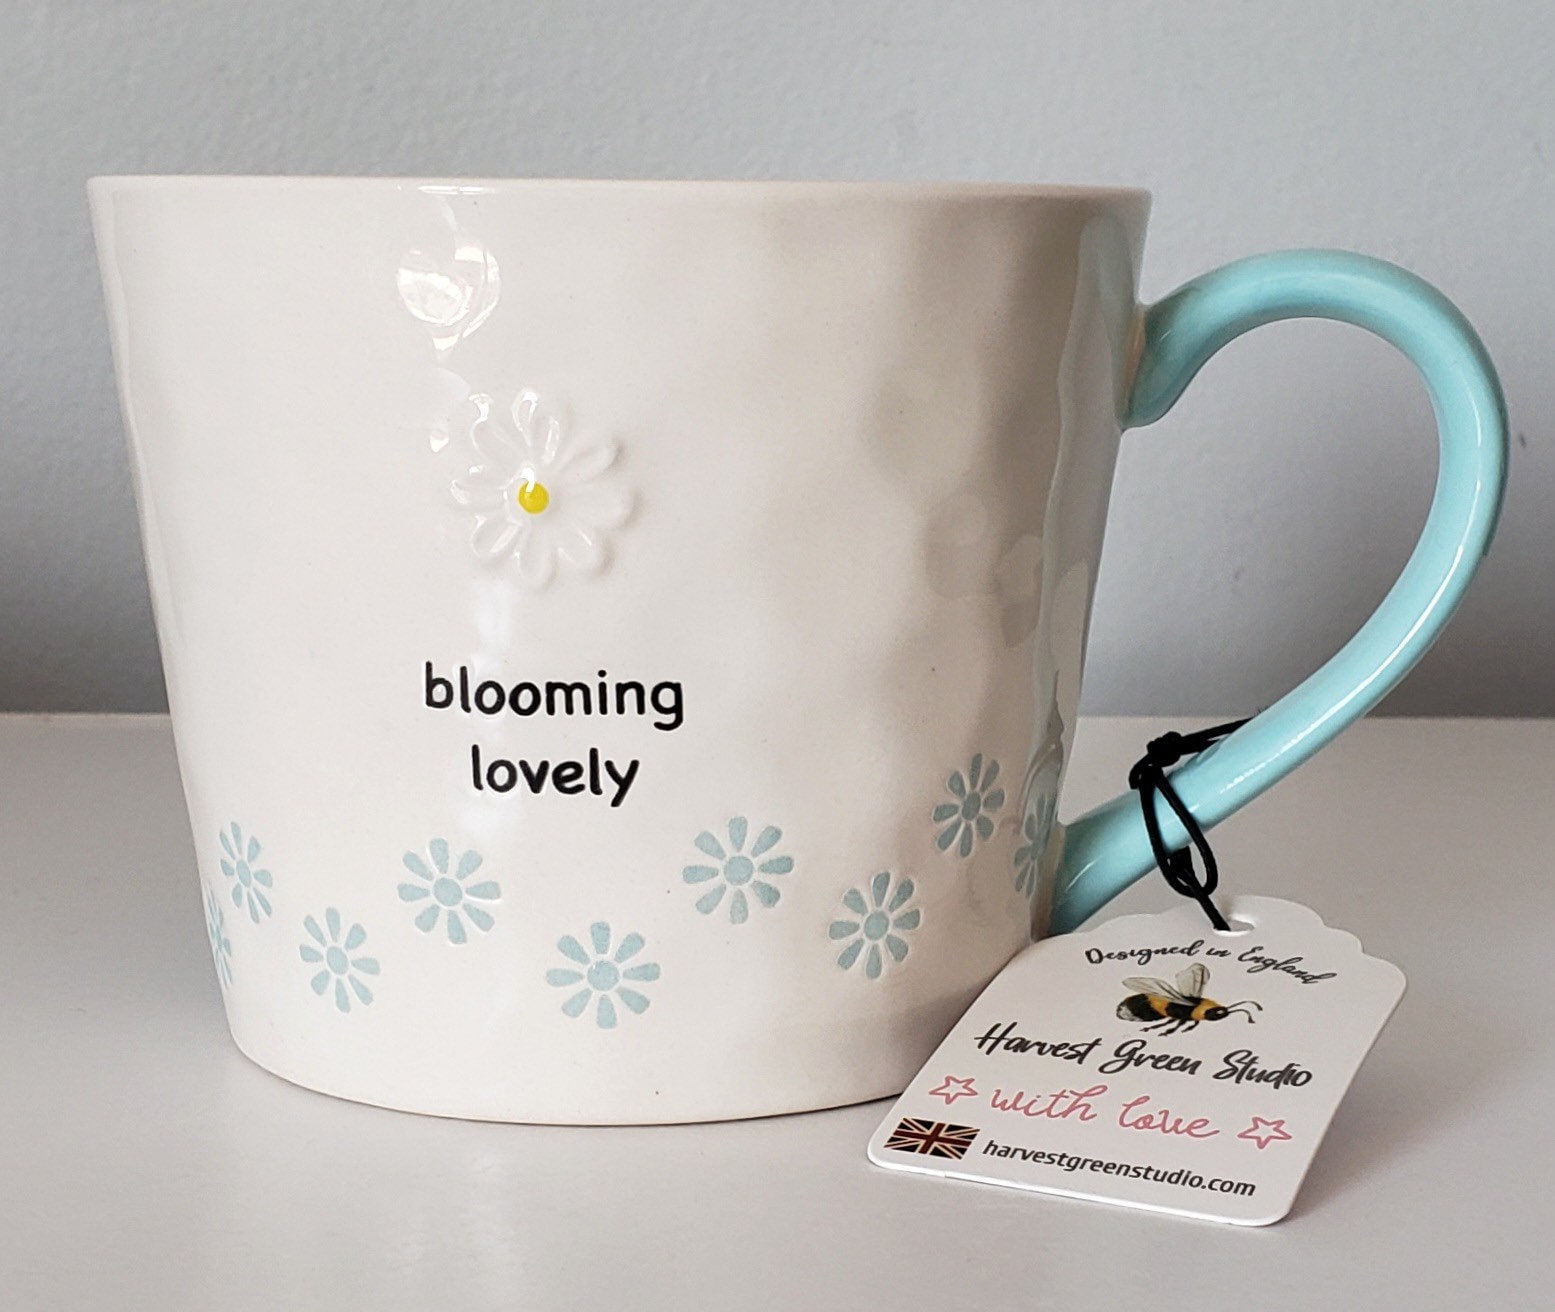 Coffee　Mug　Green　Tea　Harvest　LOVELY　13　by　Oz　Etsy　BLOOMING　Cup